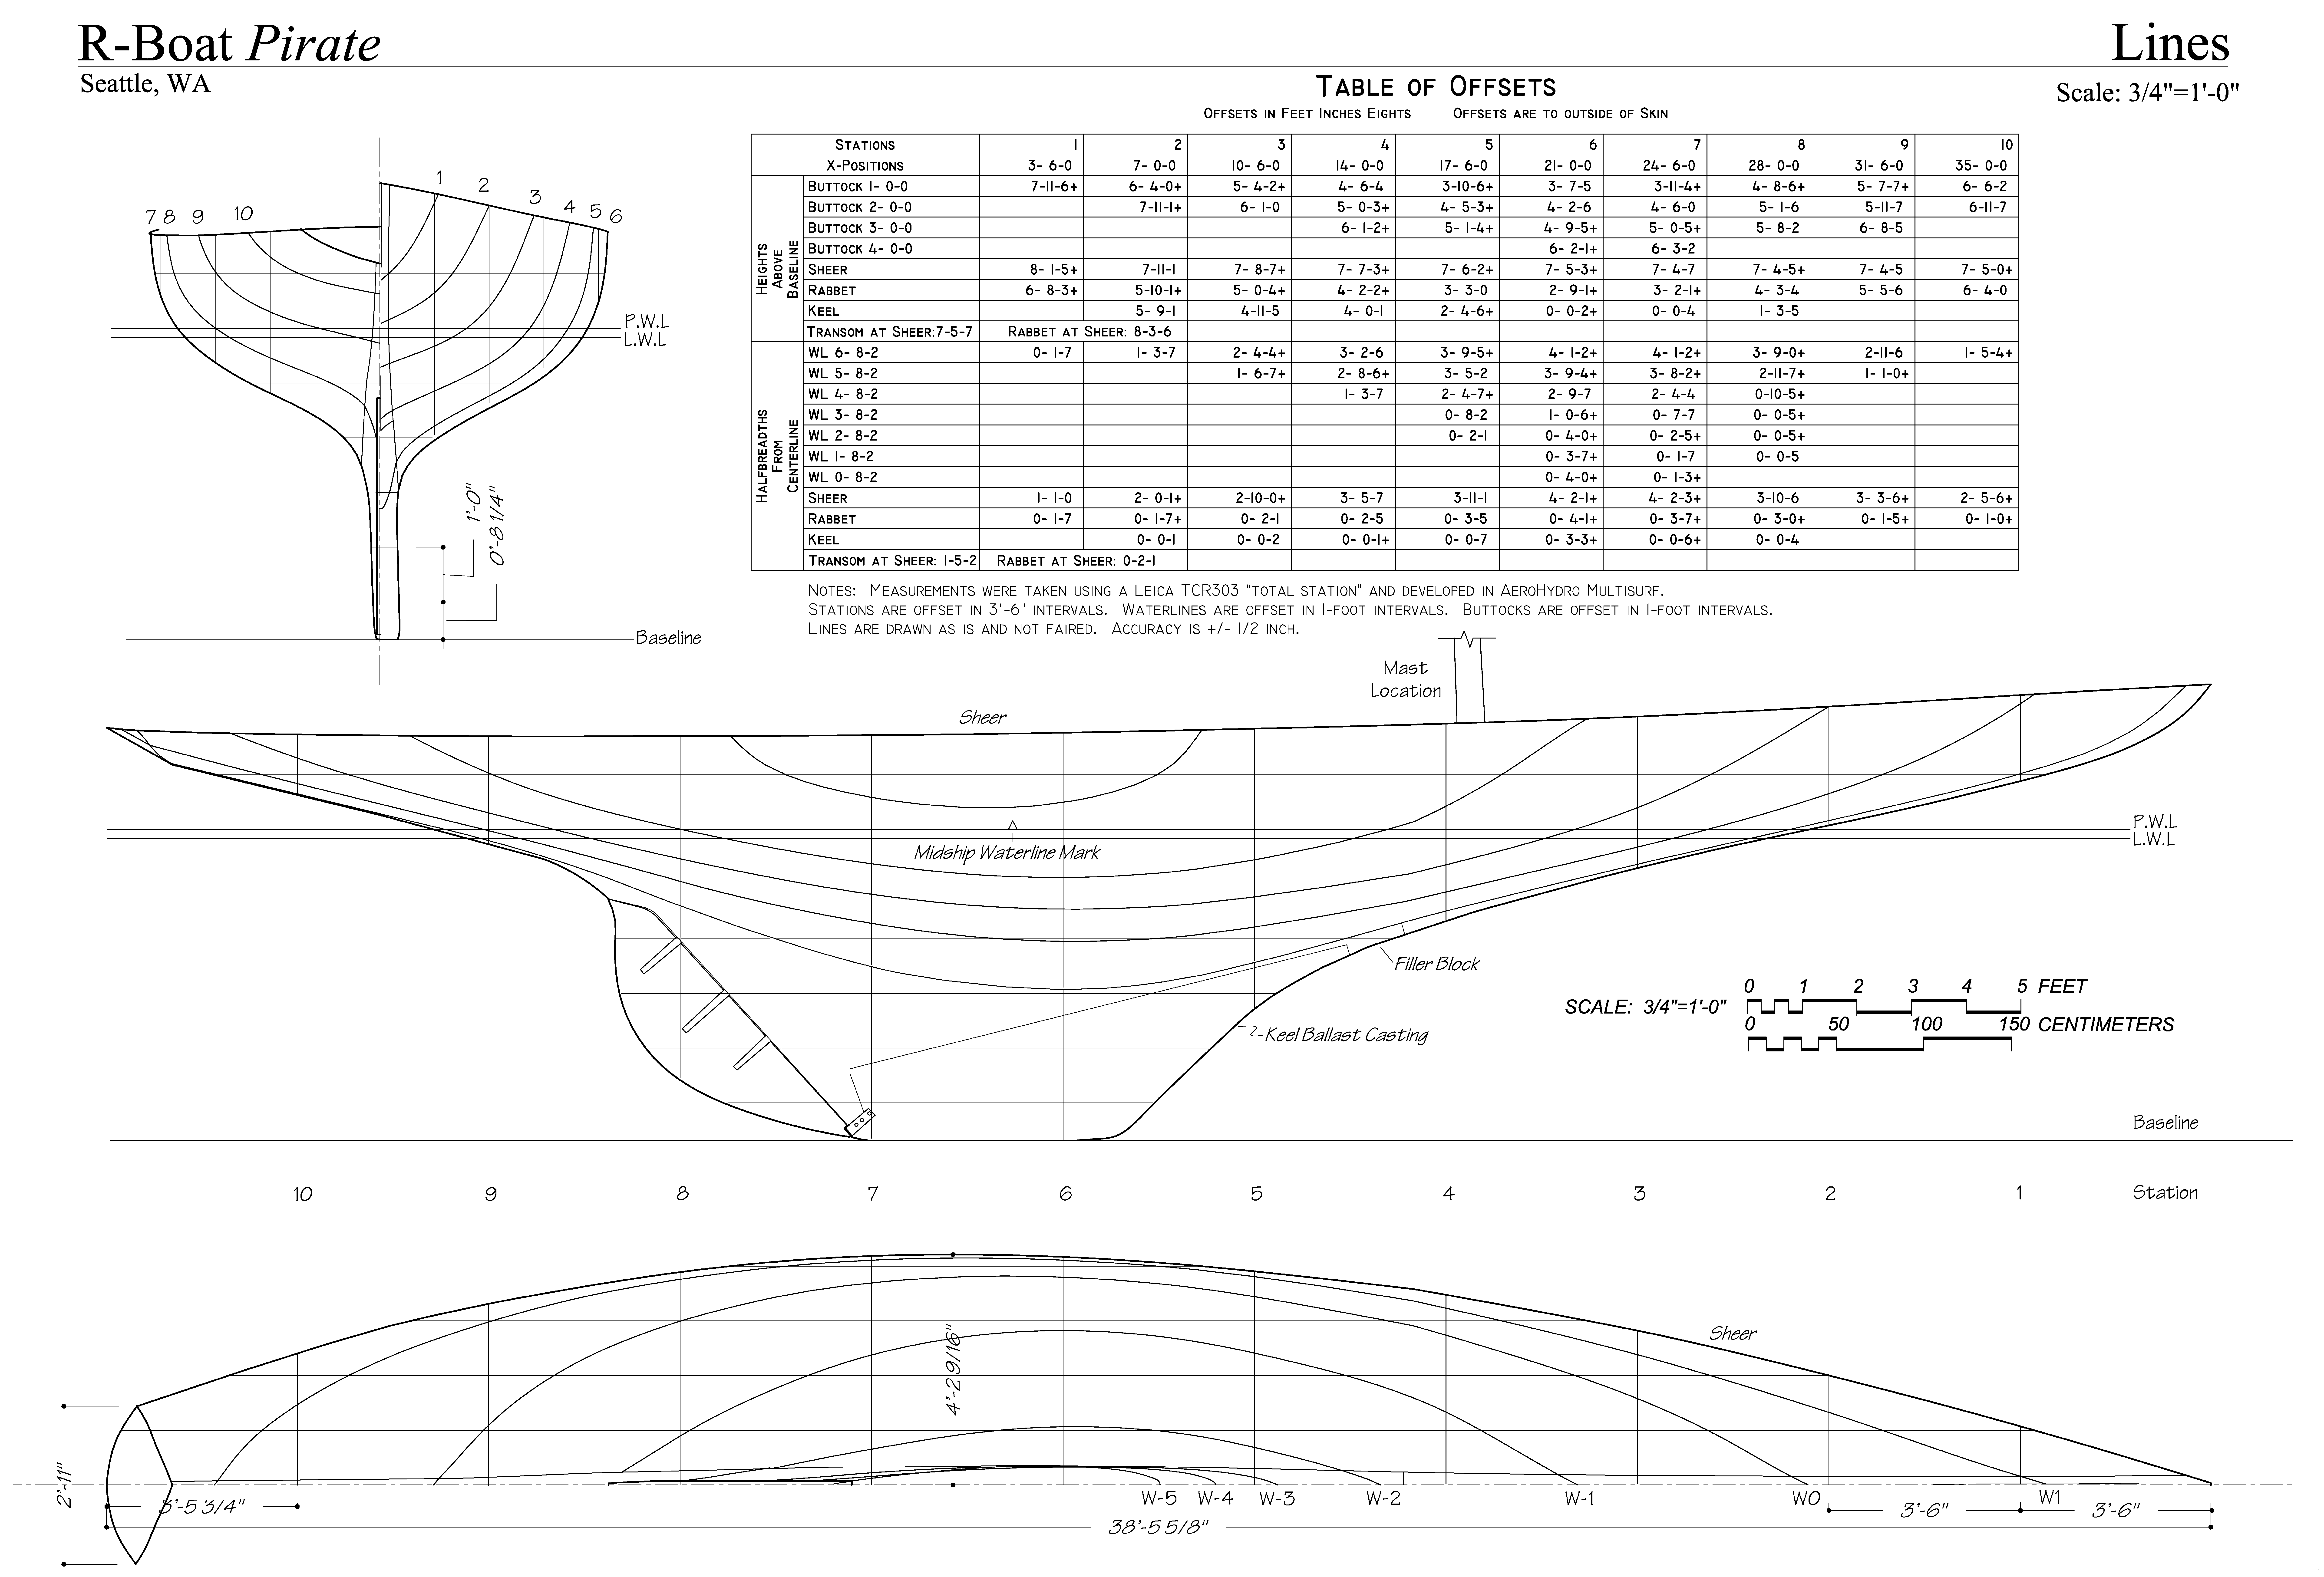 Ships lines plan of R-boat Pirate (left-click to expand image; right 